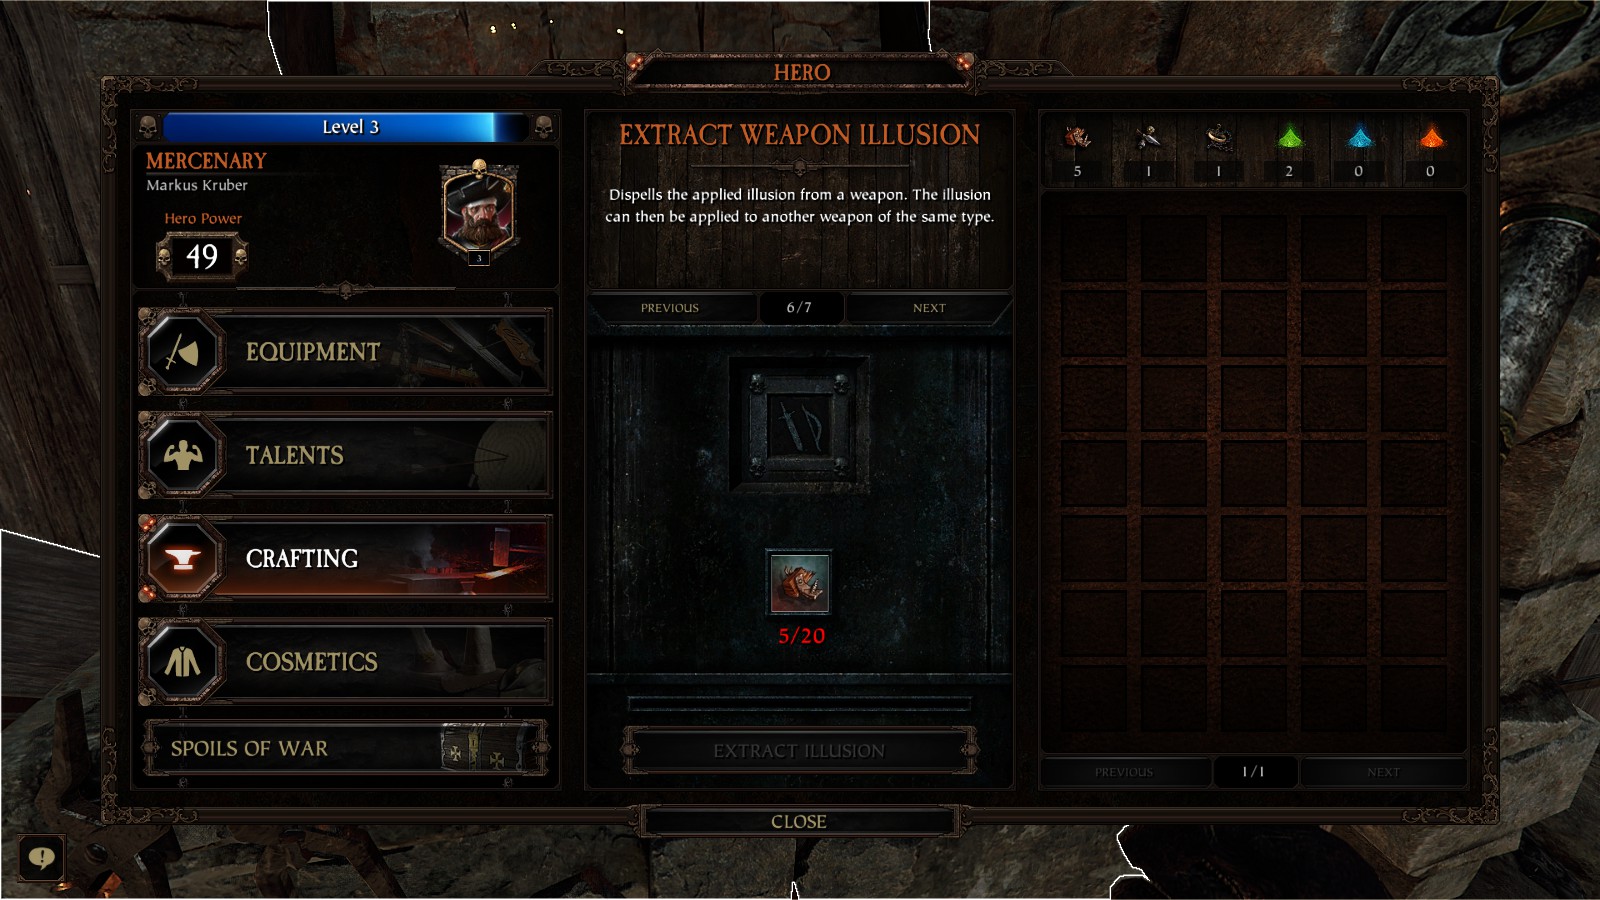 A Vermintide 2 crafting screen